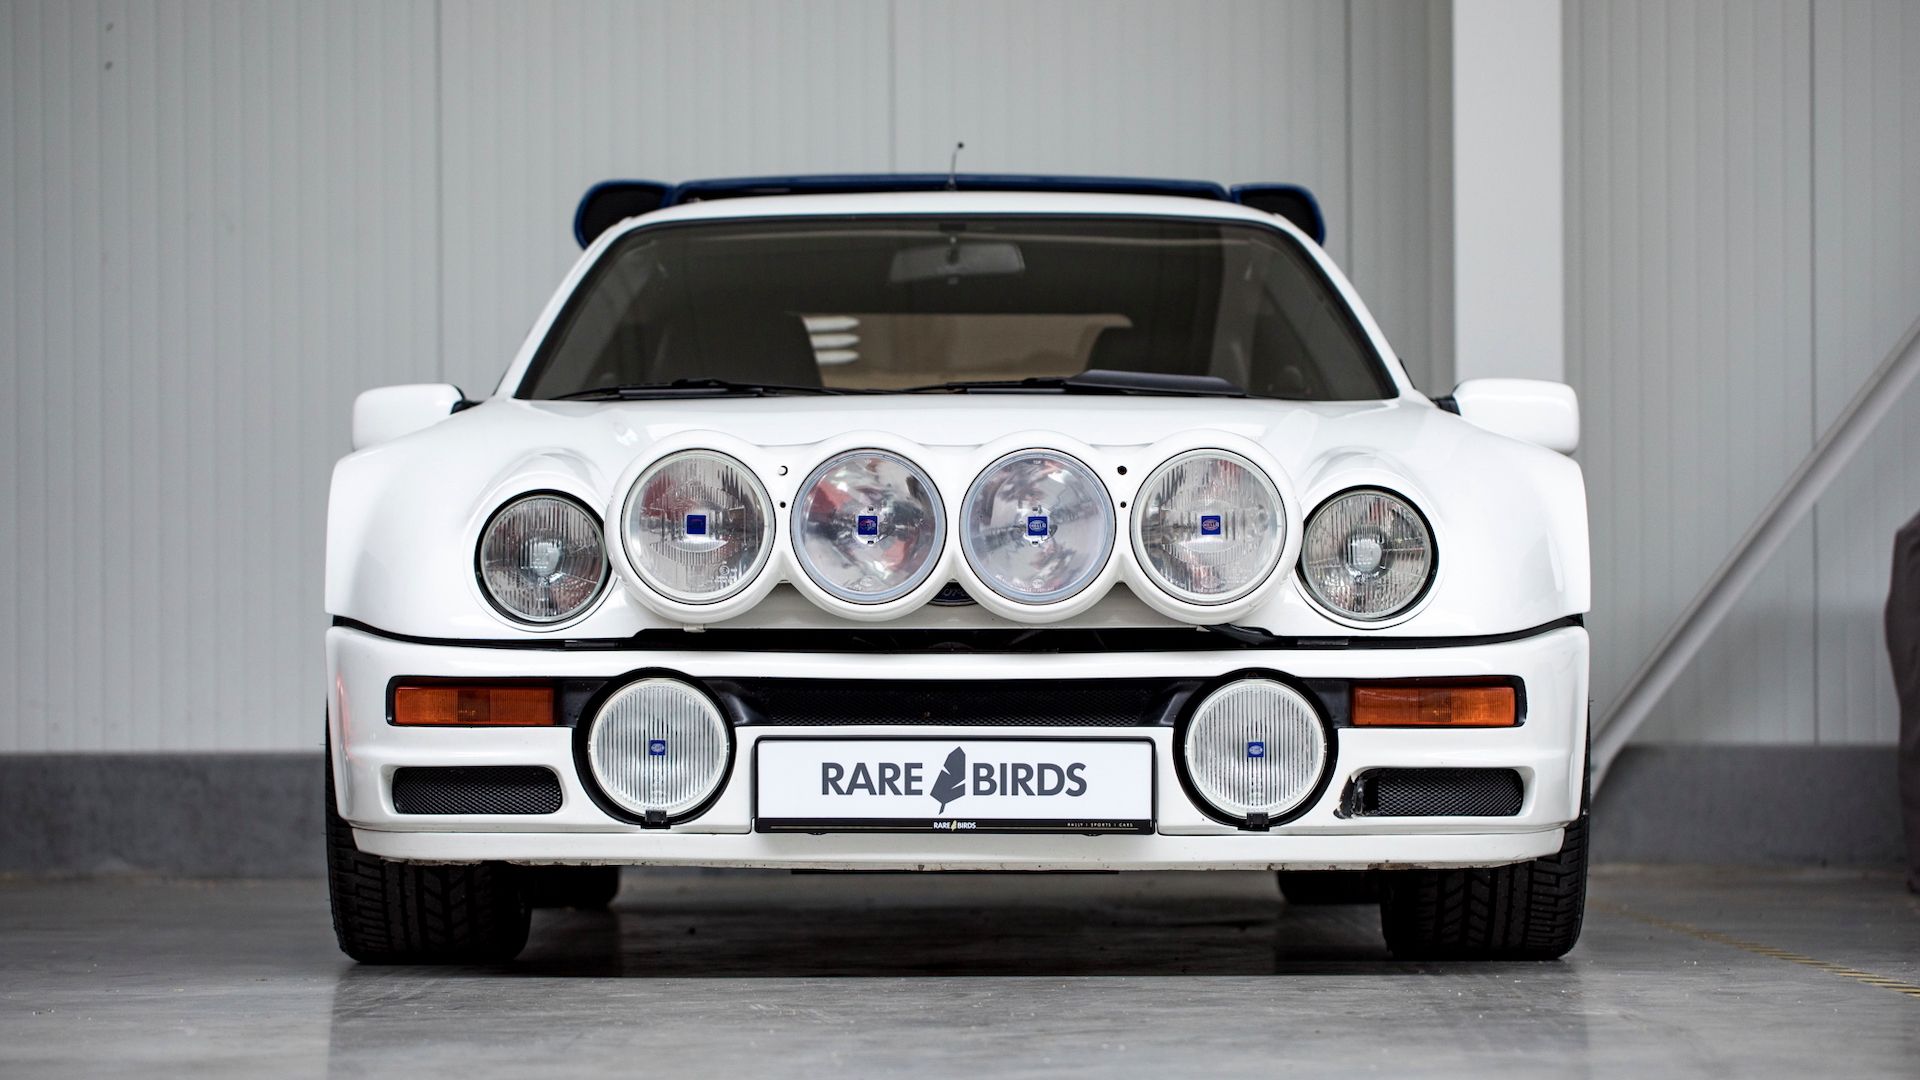 Ford RS 200 S: The Epitome Of A Fast .rare Birds.de